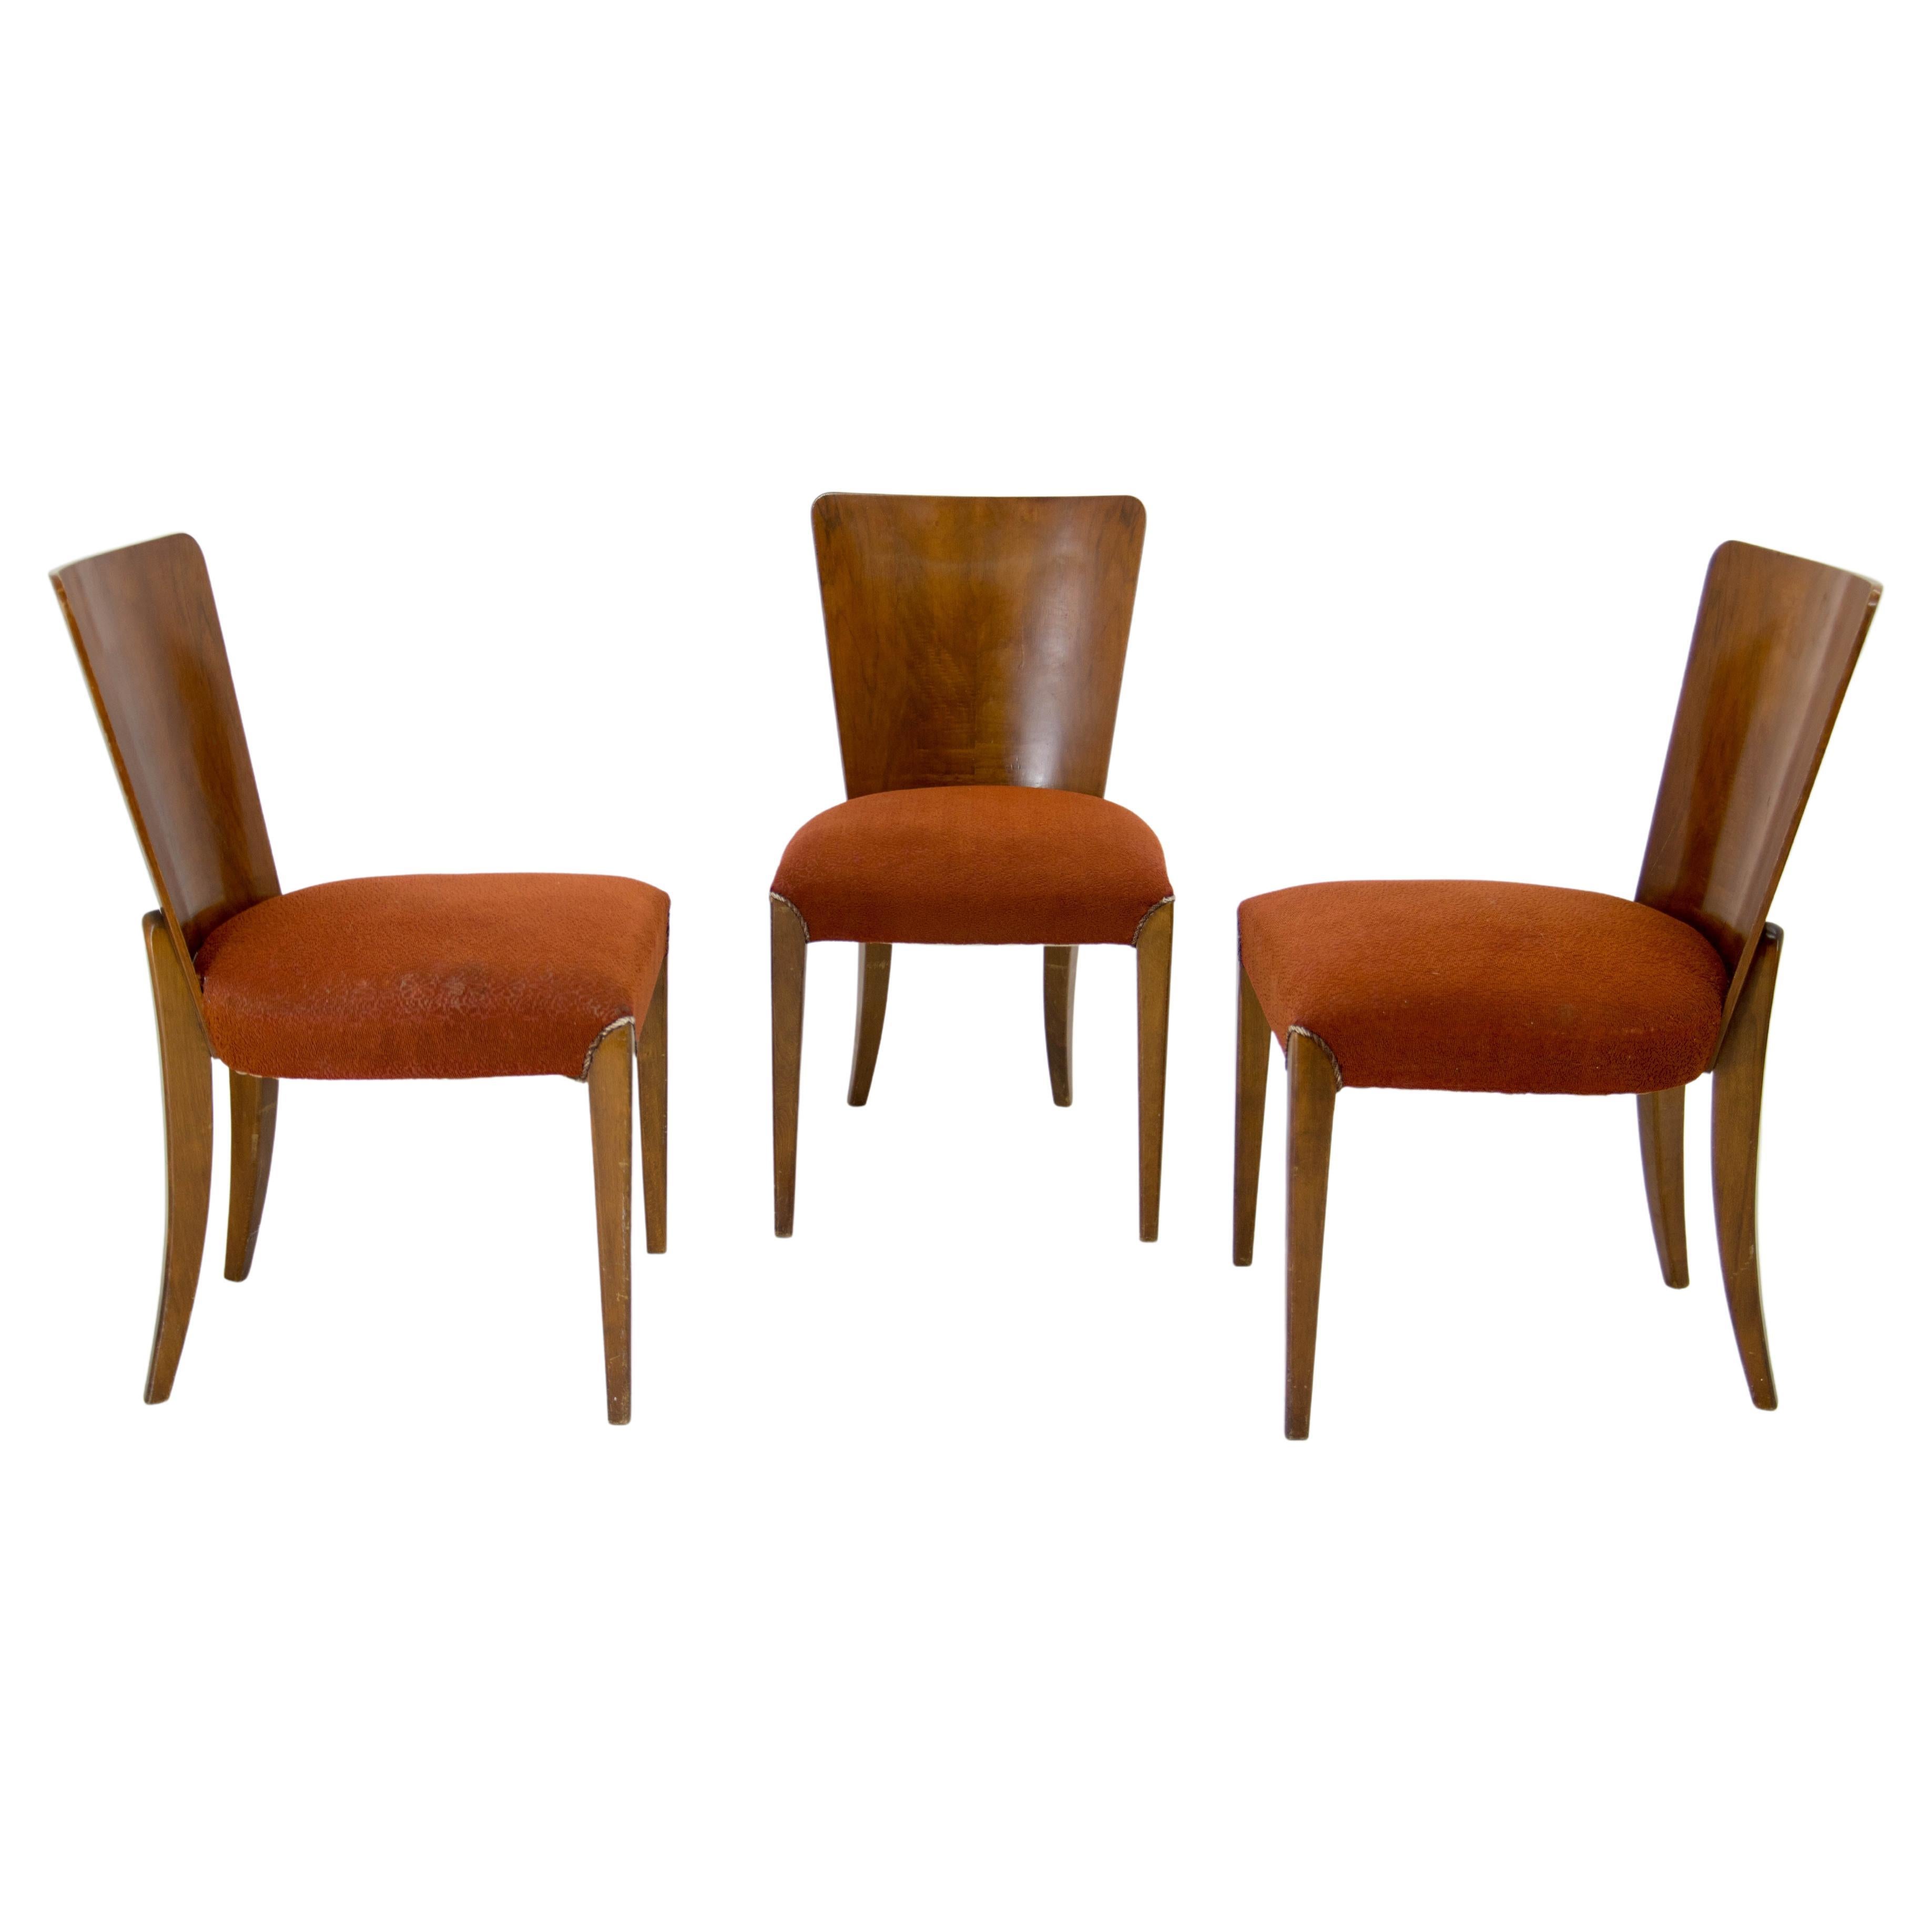 Art Deco Dining Chairs H-214 by Jindrich Halabala for UP Závody, Set of 3